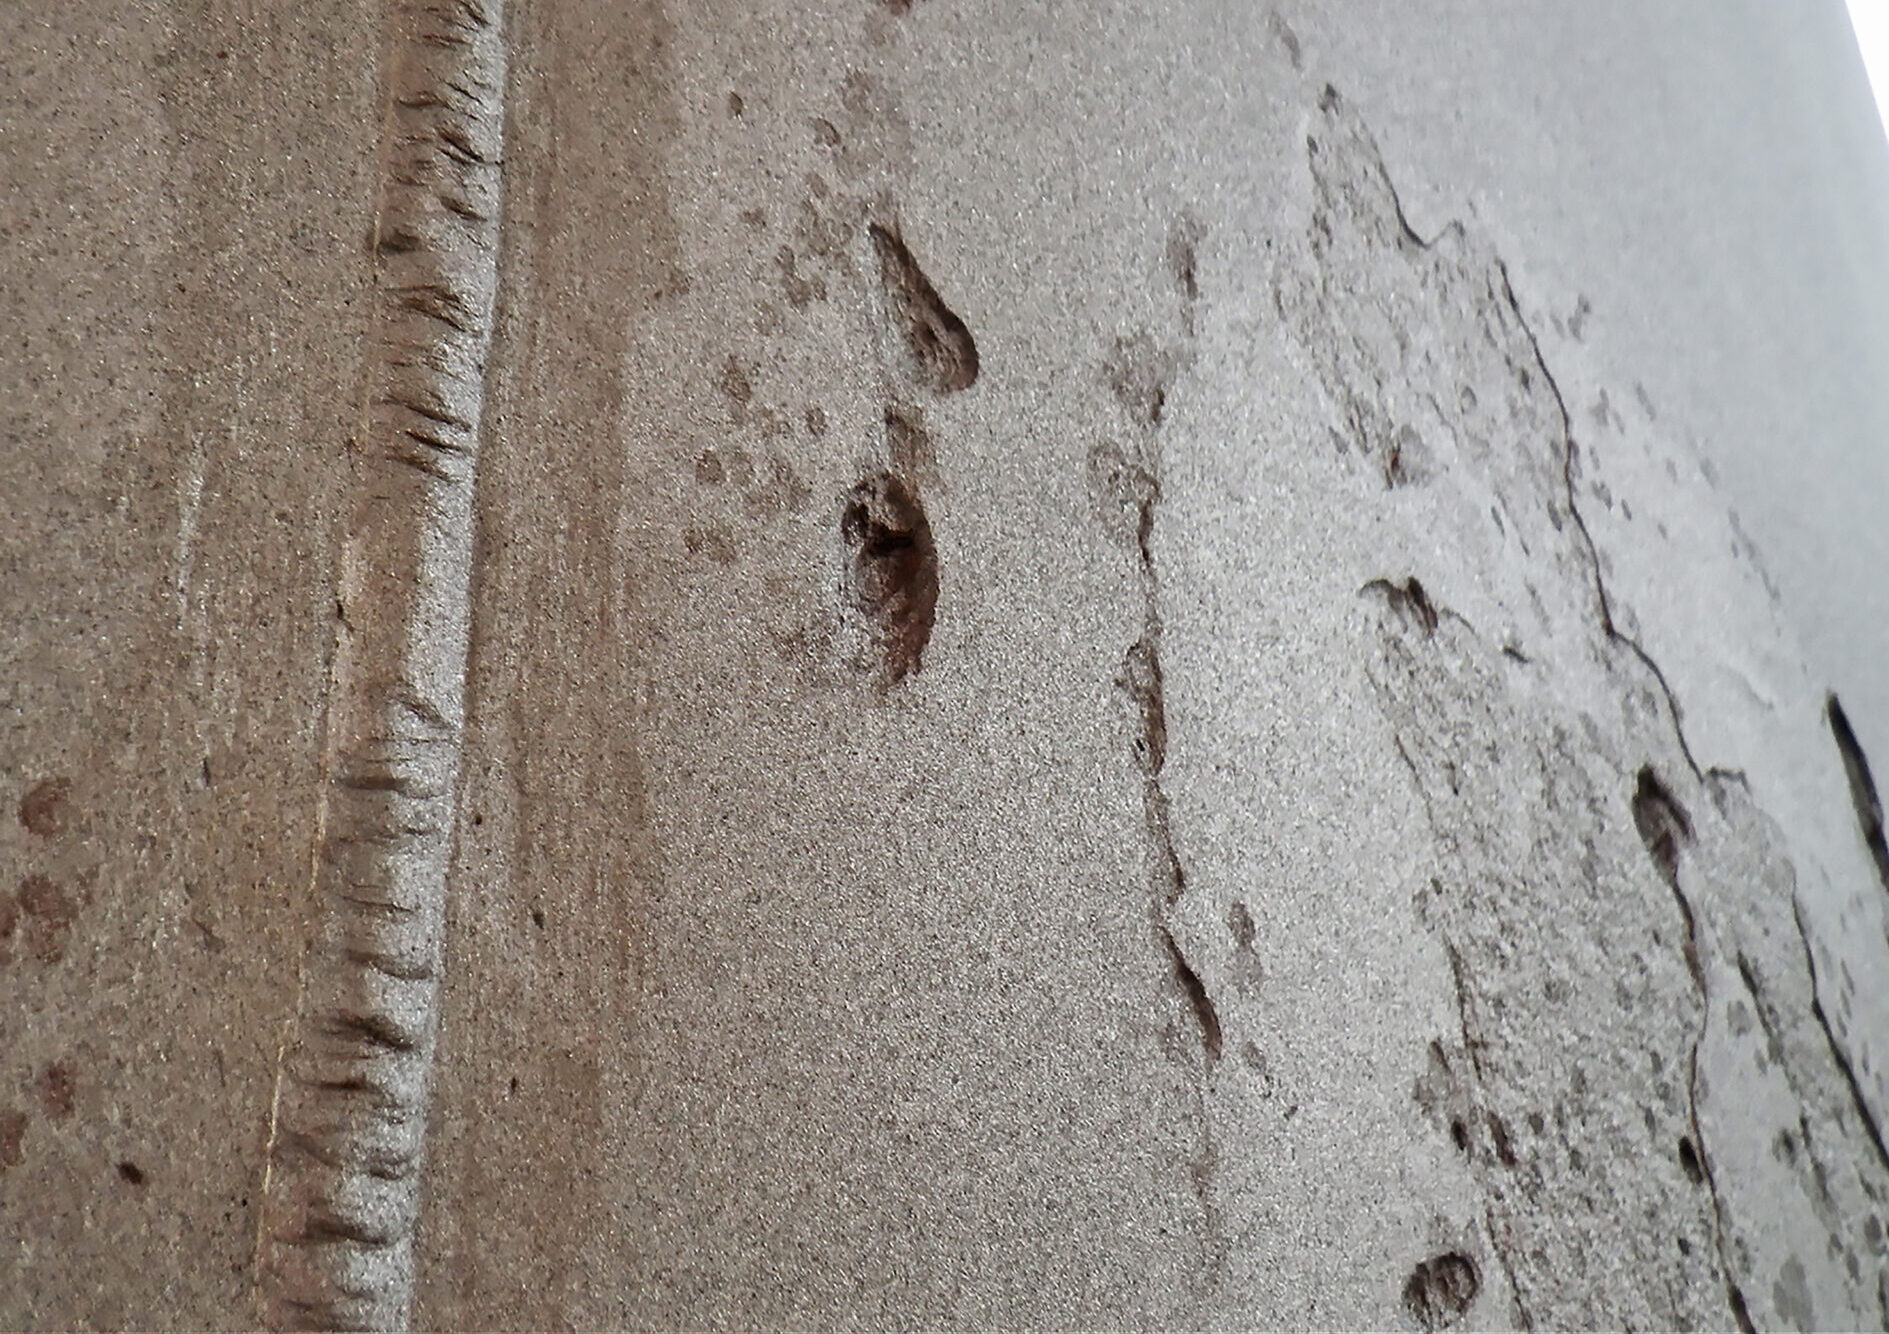 Cavitation damage on the rudder of the MT Asopos, a sister vessel to the Aliakmon, in 2015 prior to Ecoshield application.